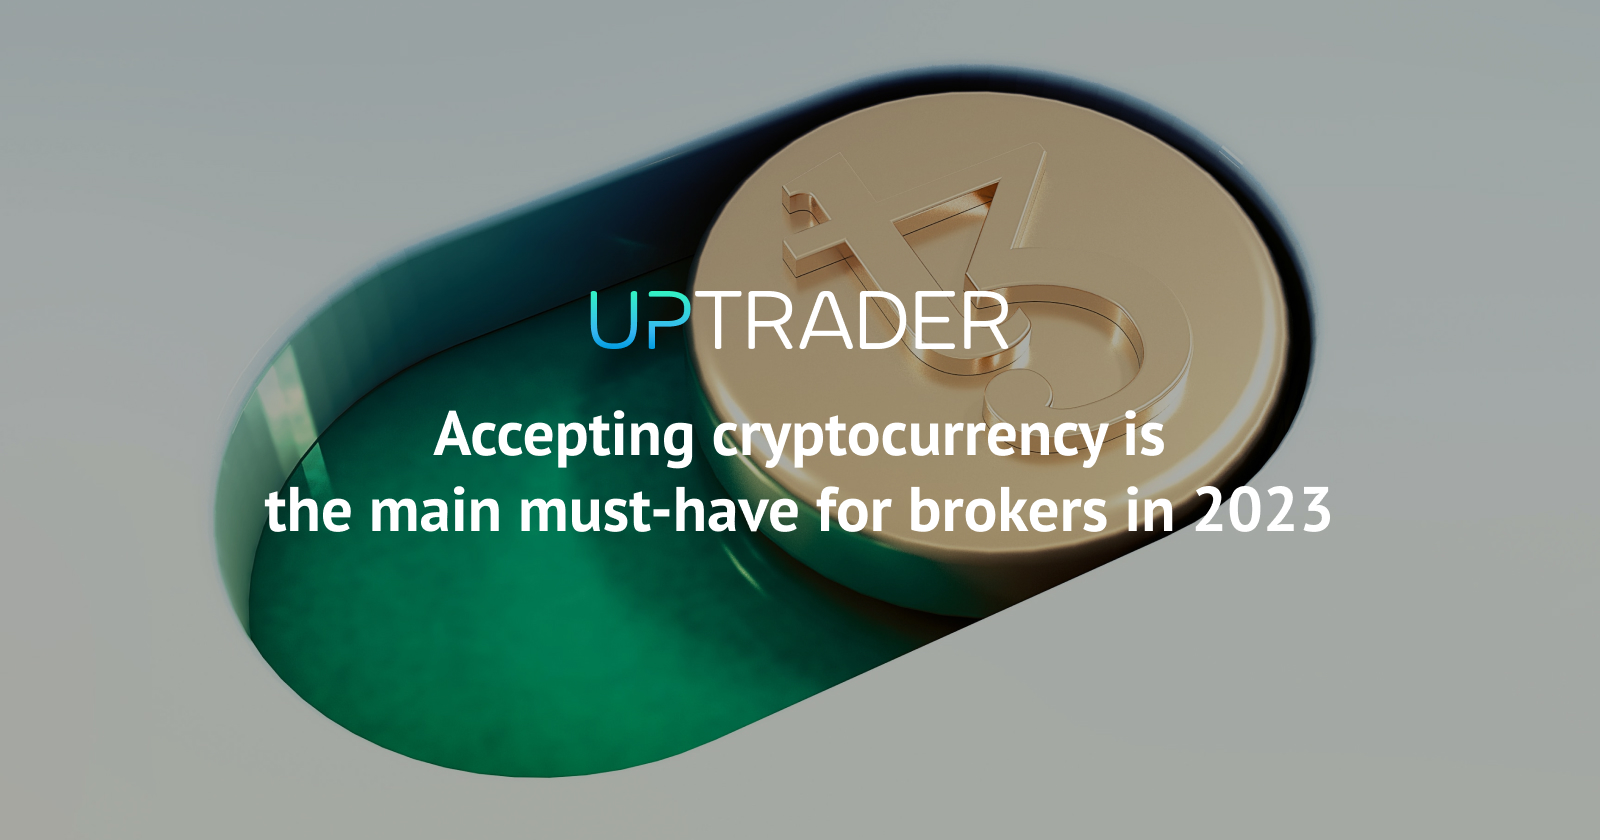 Accepting cryptocurrency is the main must-have for brokers in 2023